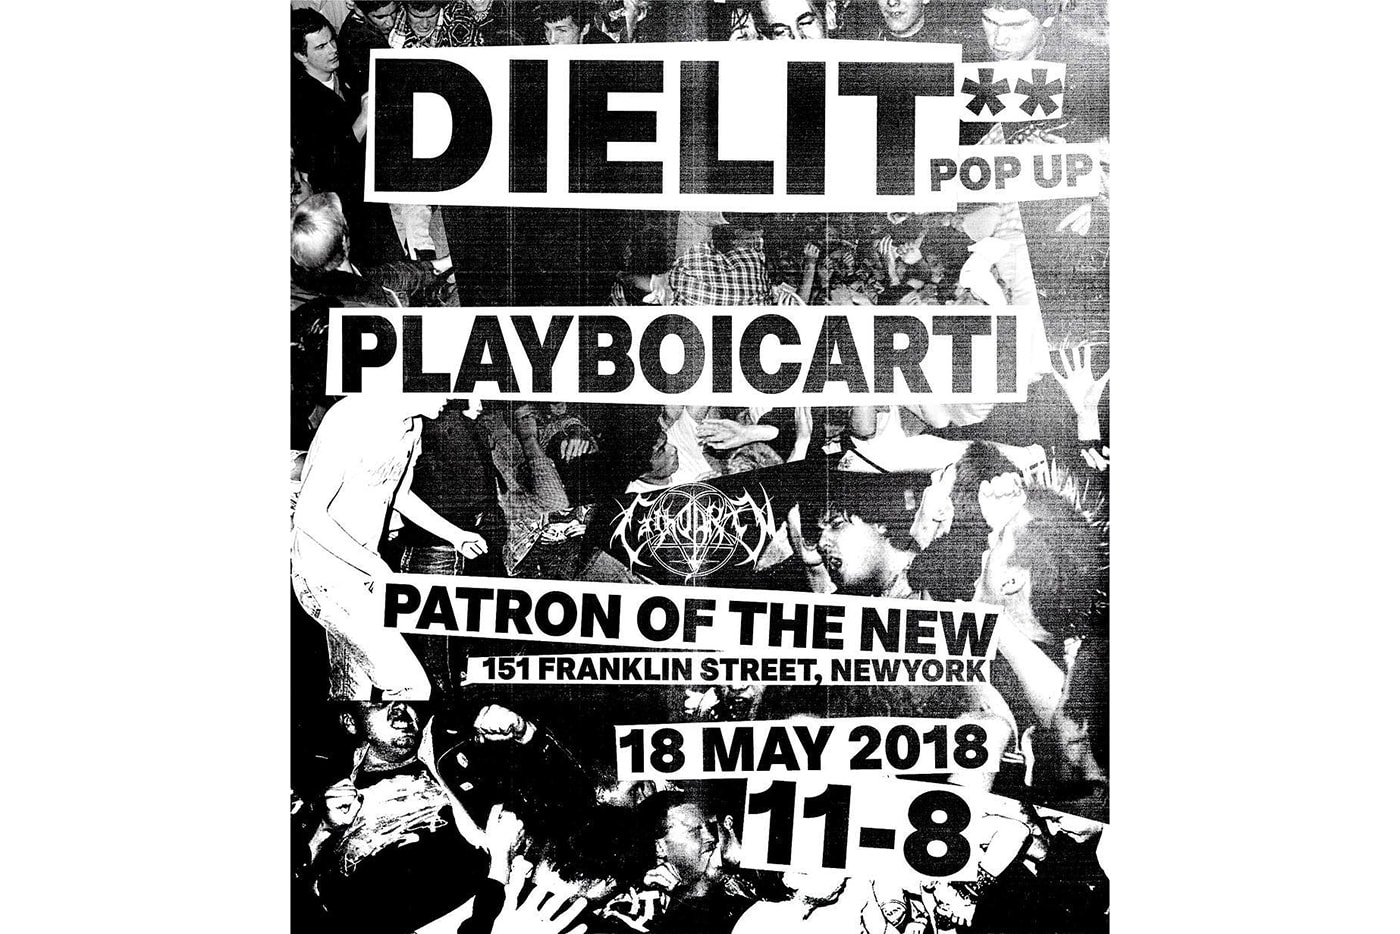 Playboi Carti Patron of the New Die Lit pop-up shop may 18 2018